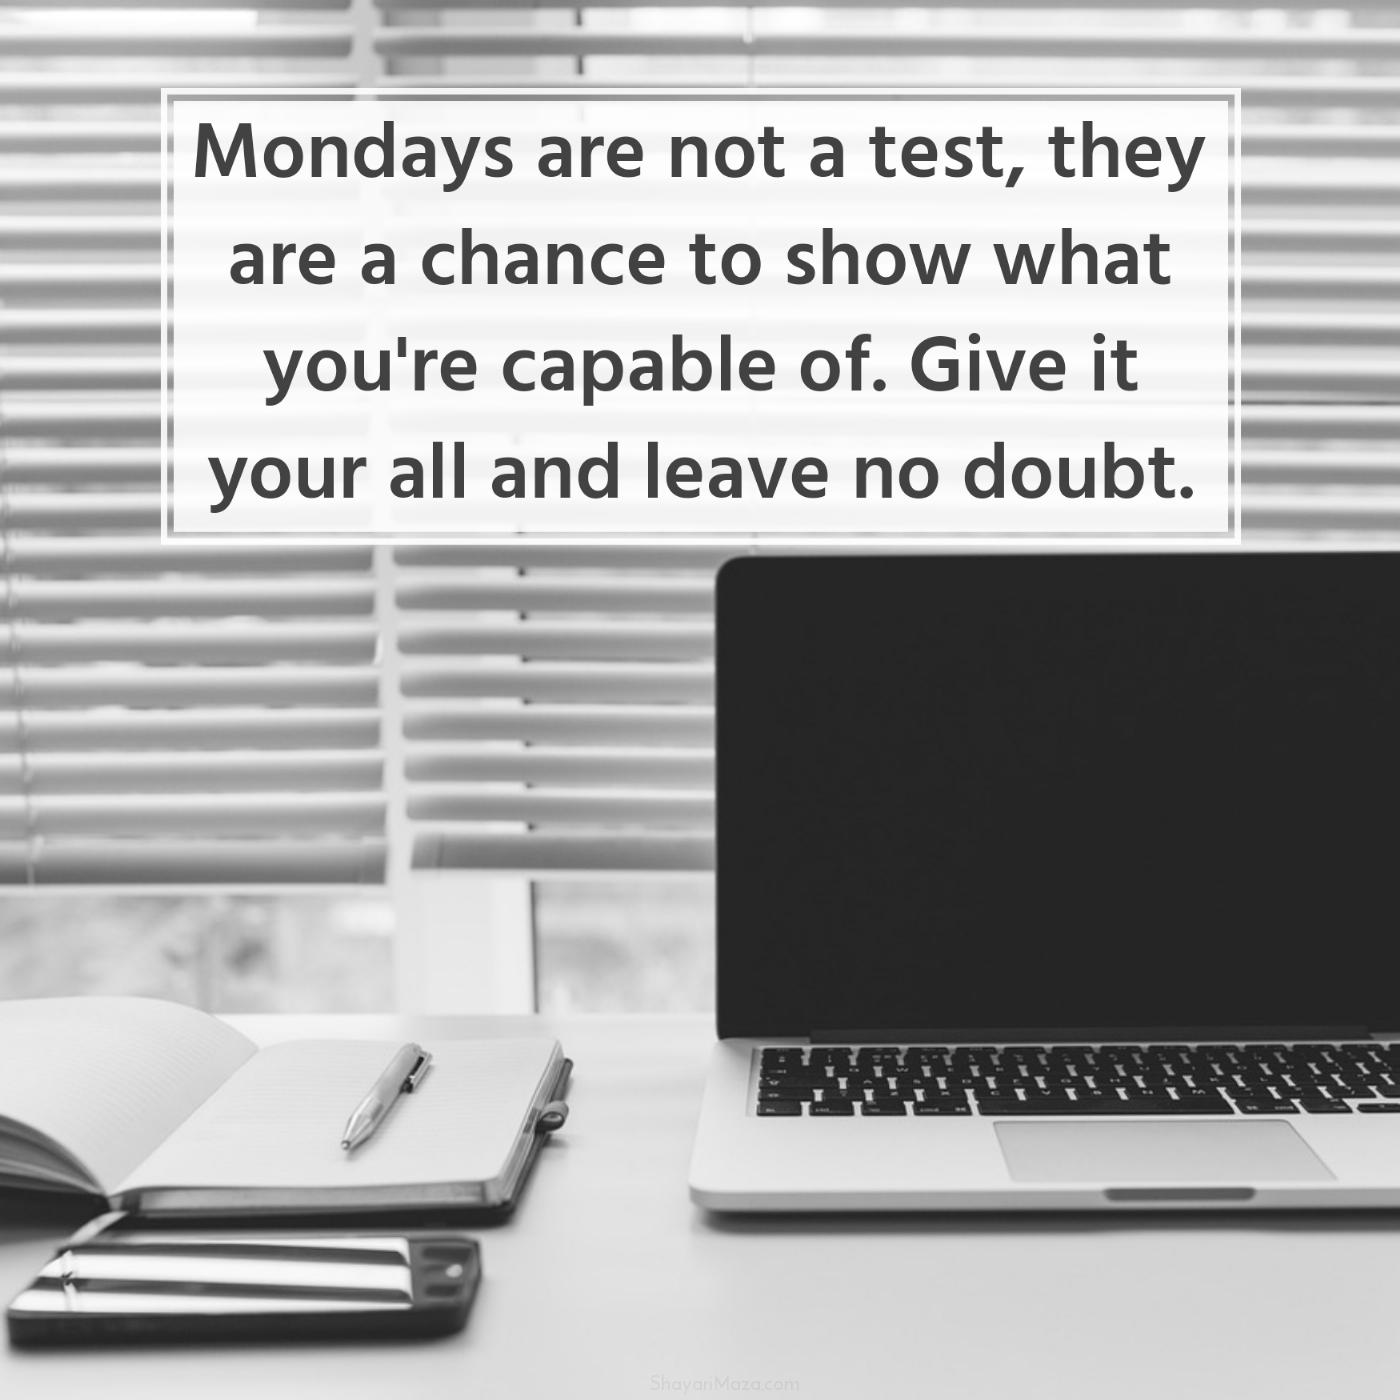 Mondays are not a test they are a chance to show